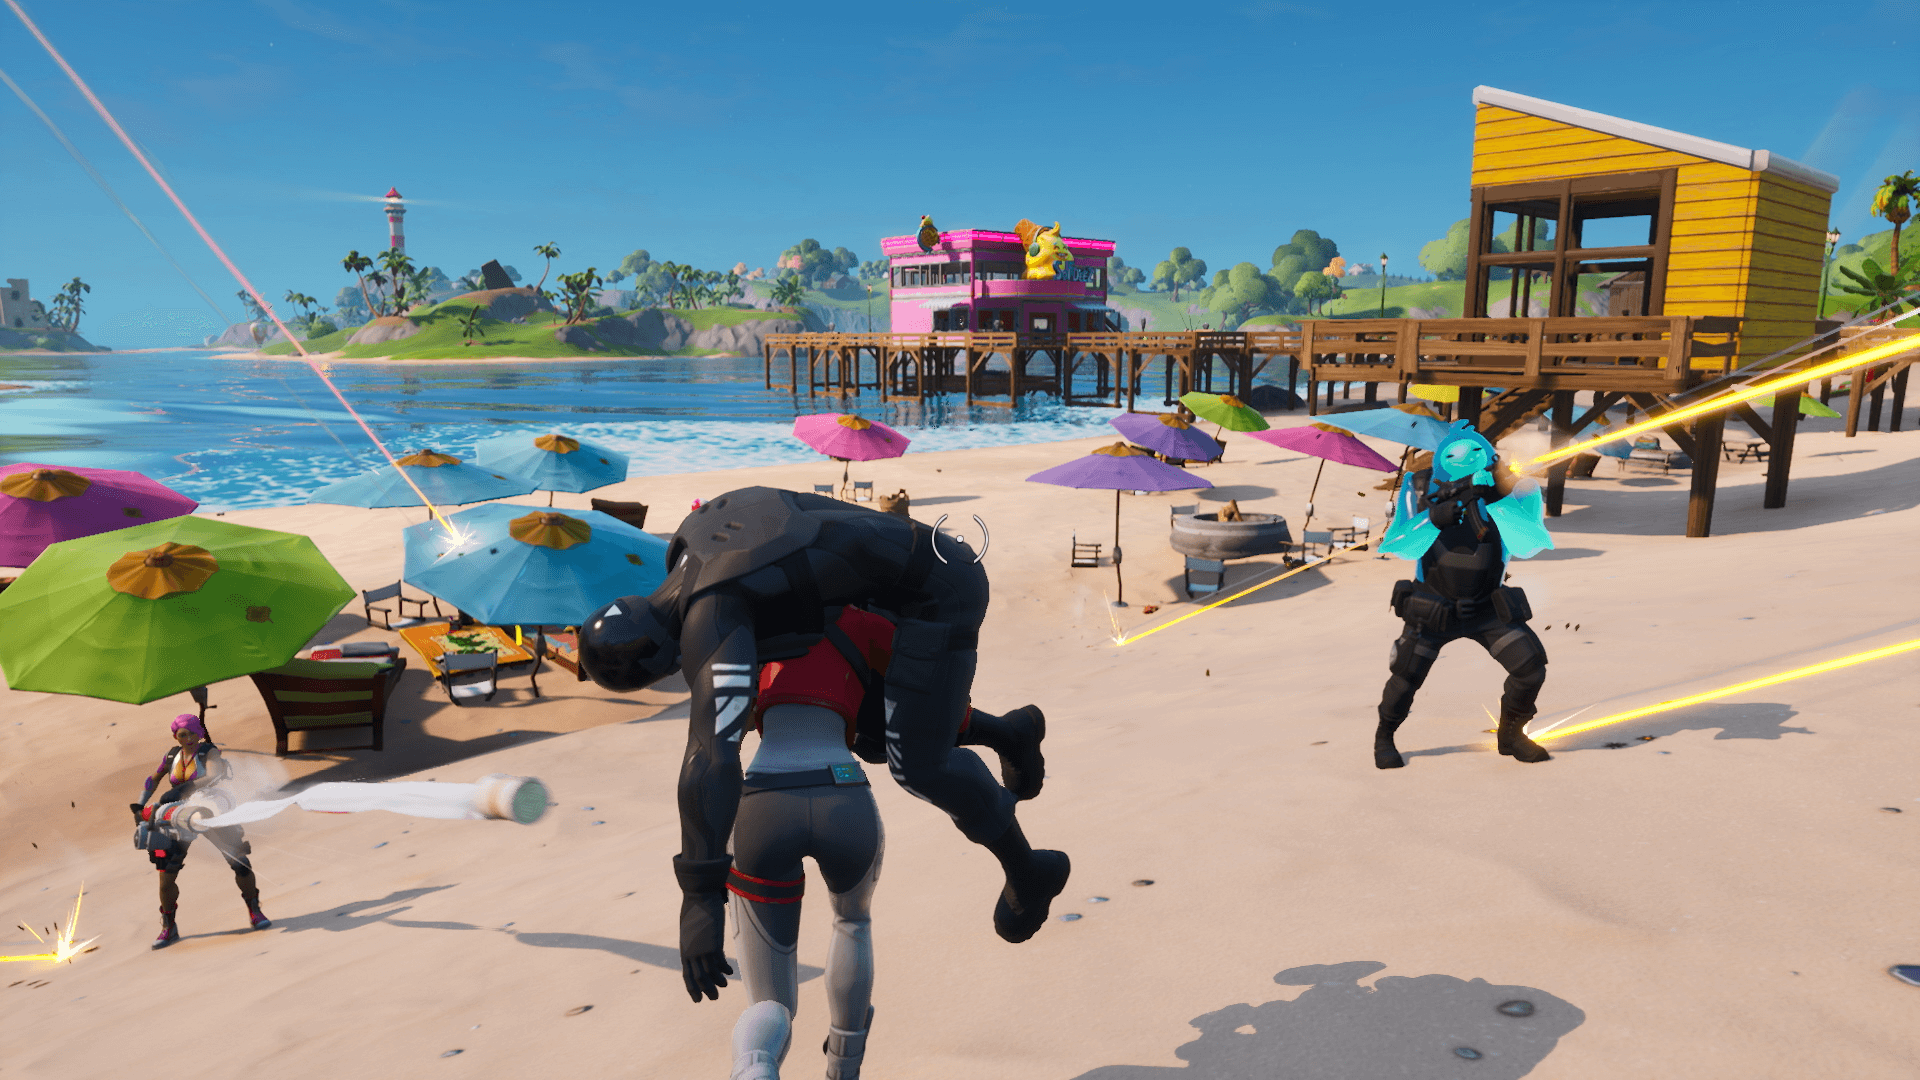 Tencent, which owns a 40% stake in US developer Epic Games, launched Fortnite in China in April 2018. (Picture: Epic Games)